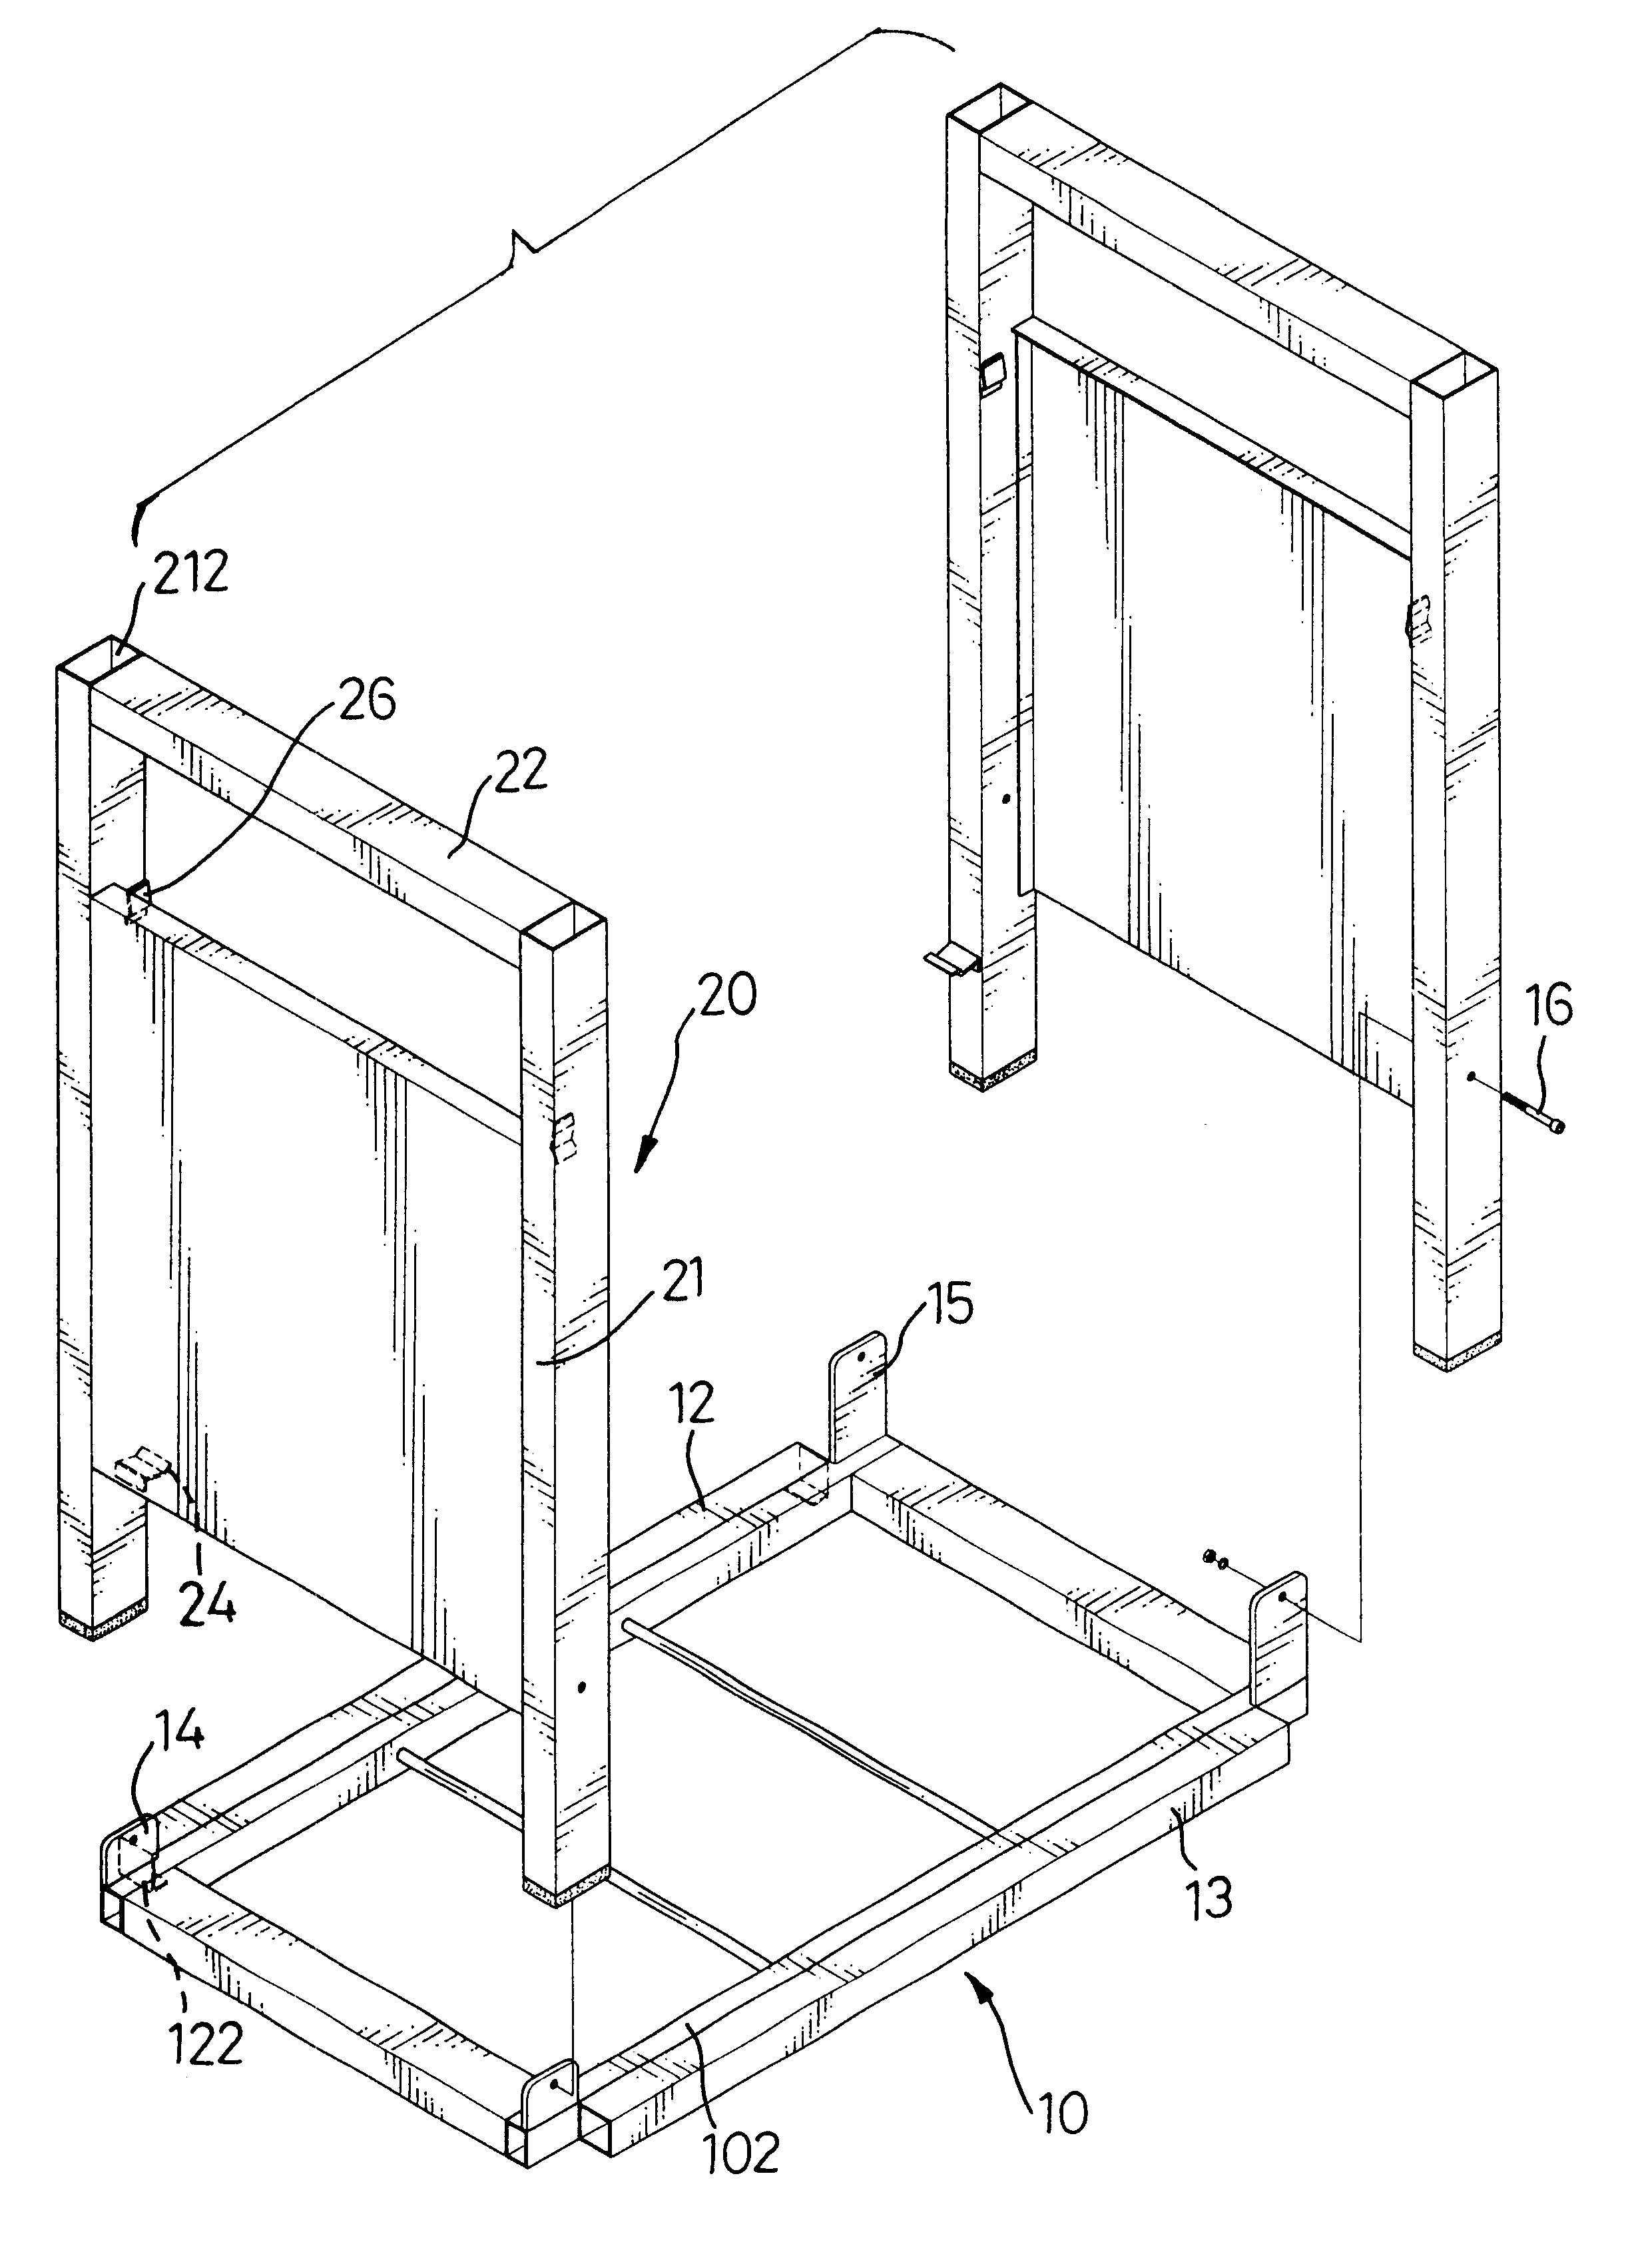 Foldable stand